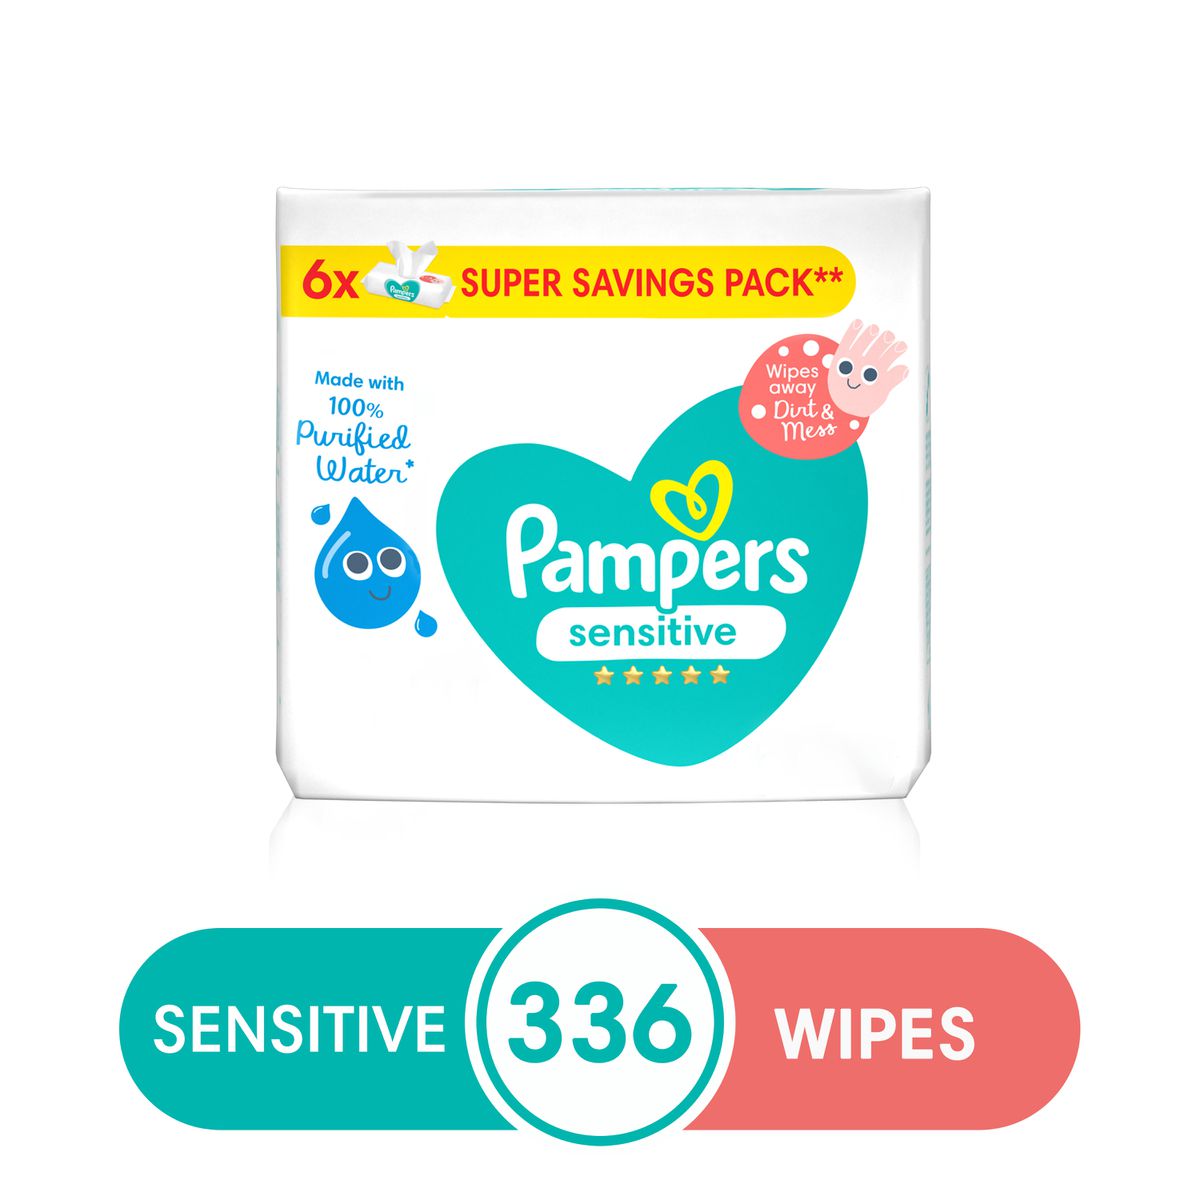 Pampers Sensitive Wipes - 336 (6x56) - 100% Purified Water Wipes